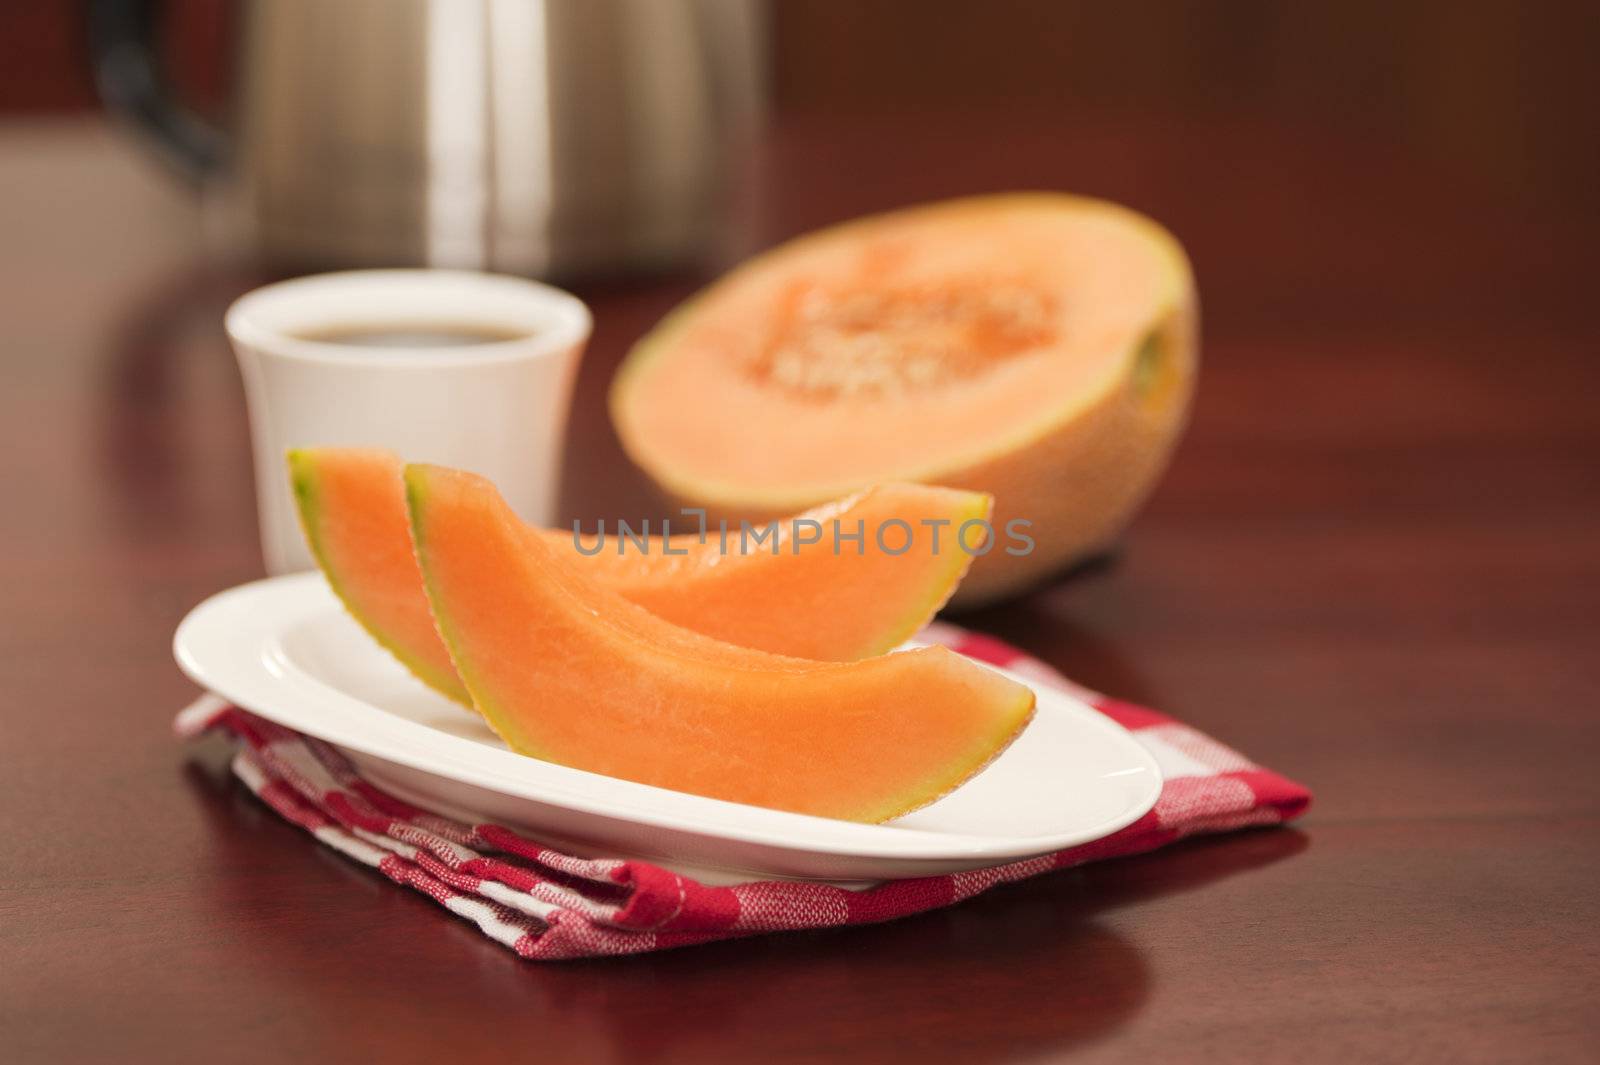 Wedges of fresh cantaloupe served with coffee.